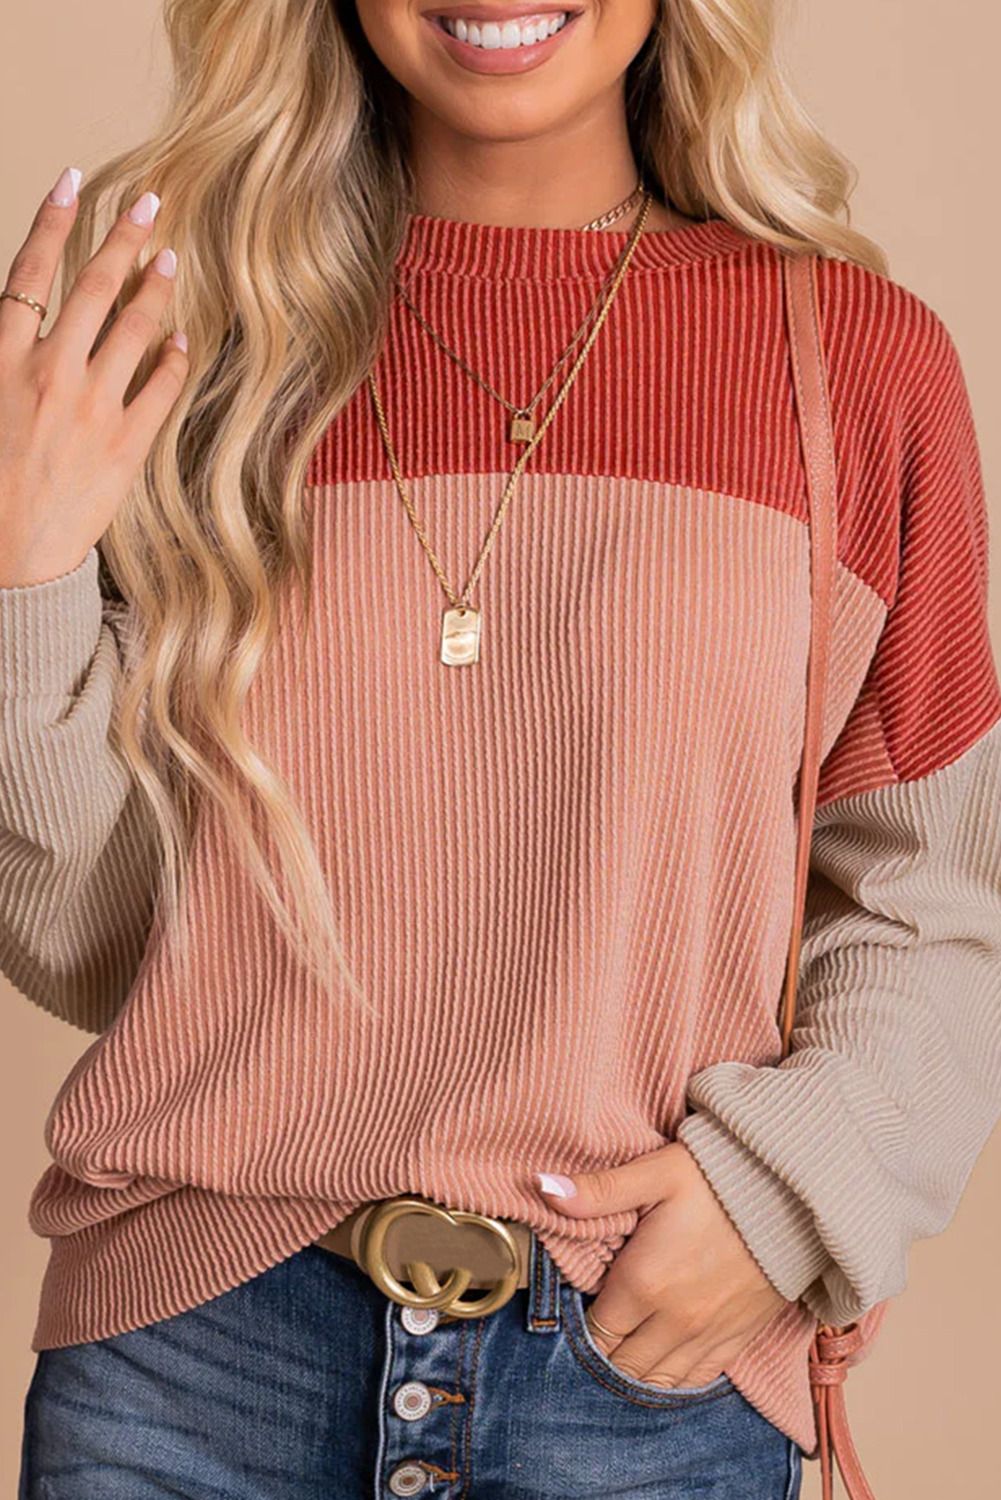 Shewin Wholesale WESTERN Red Color Block Cording Loose Long Sleeve Top